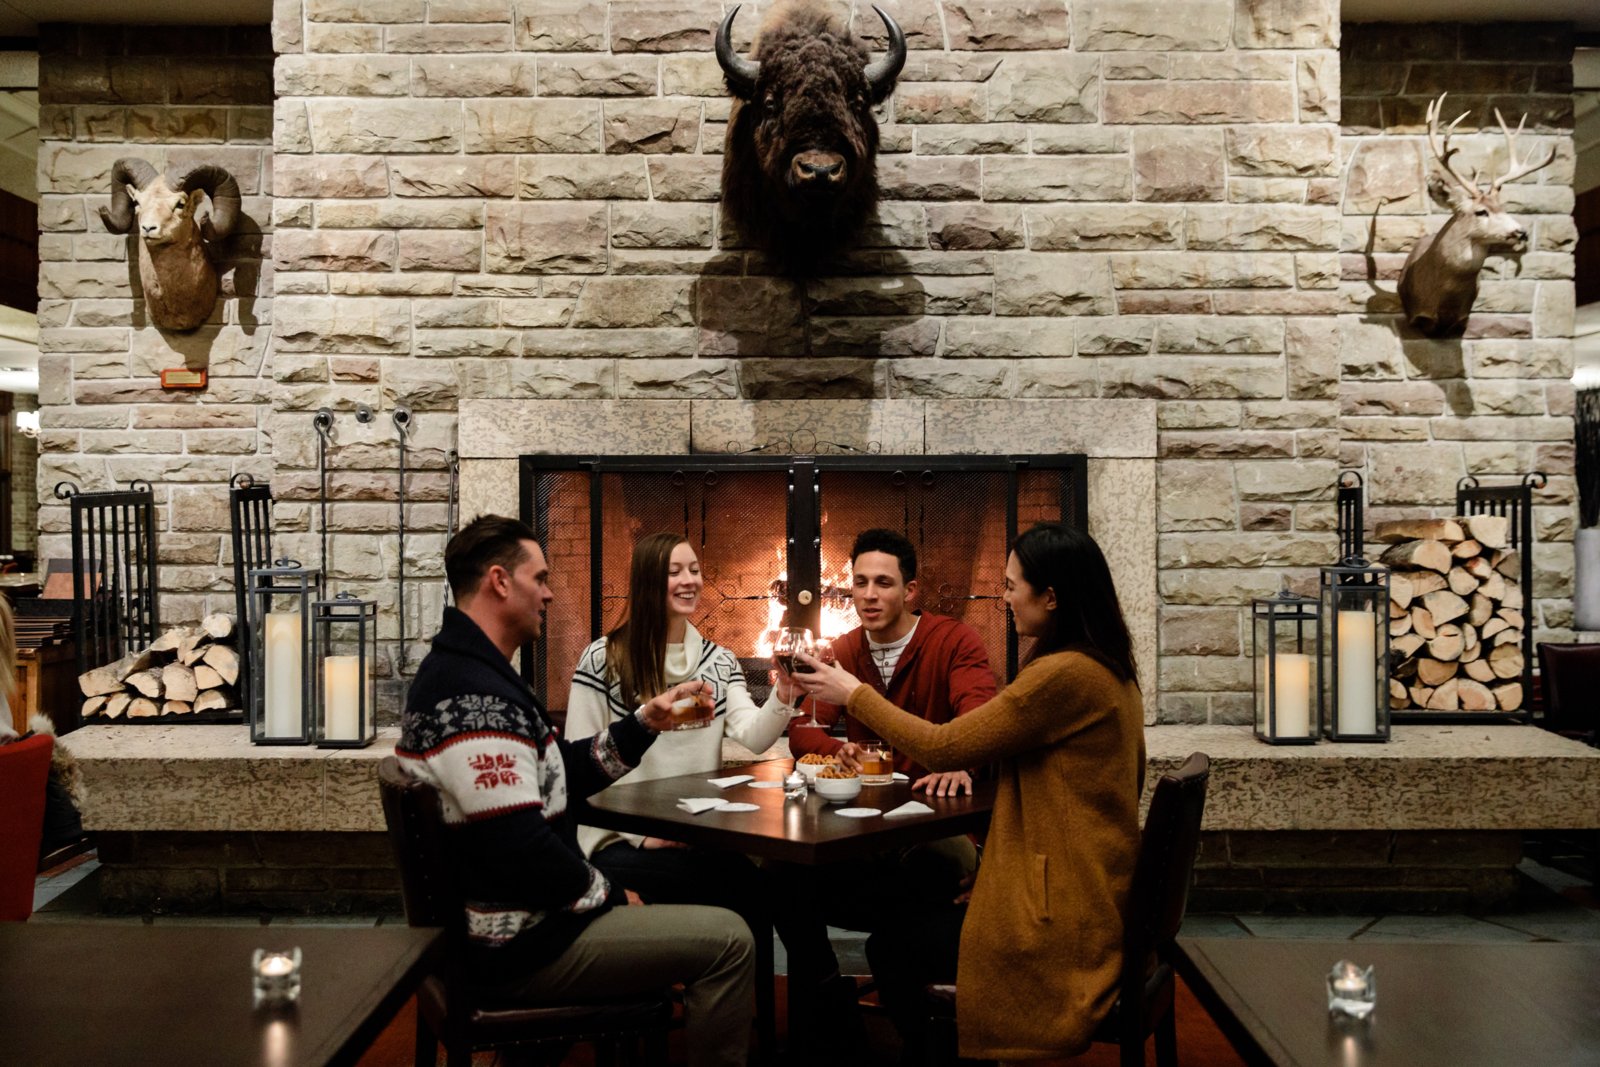 Friends enjoying drinks in front of a rustic fireplace at the Fairmont Jasper Park Lodge.